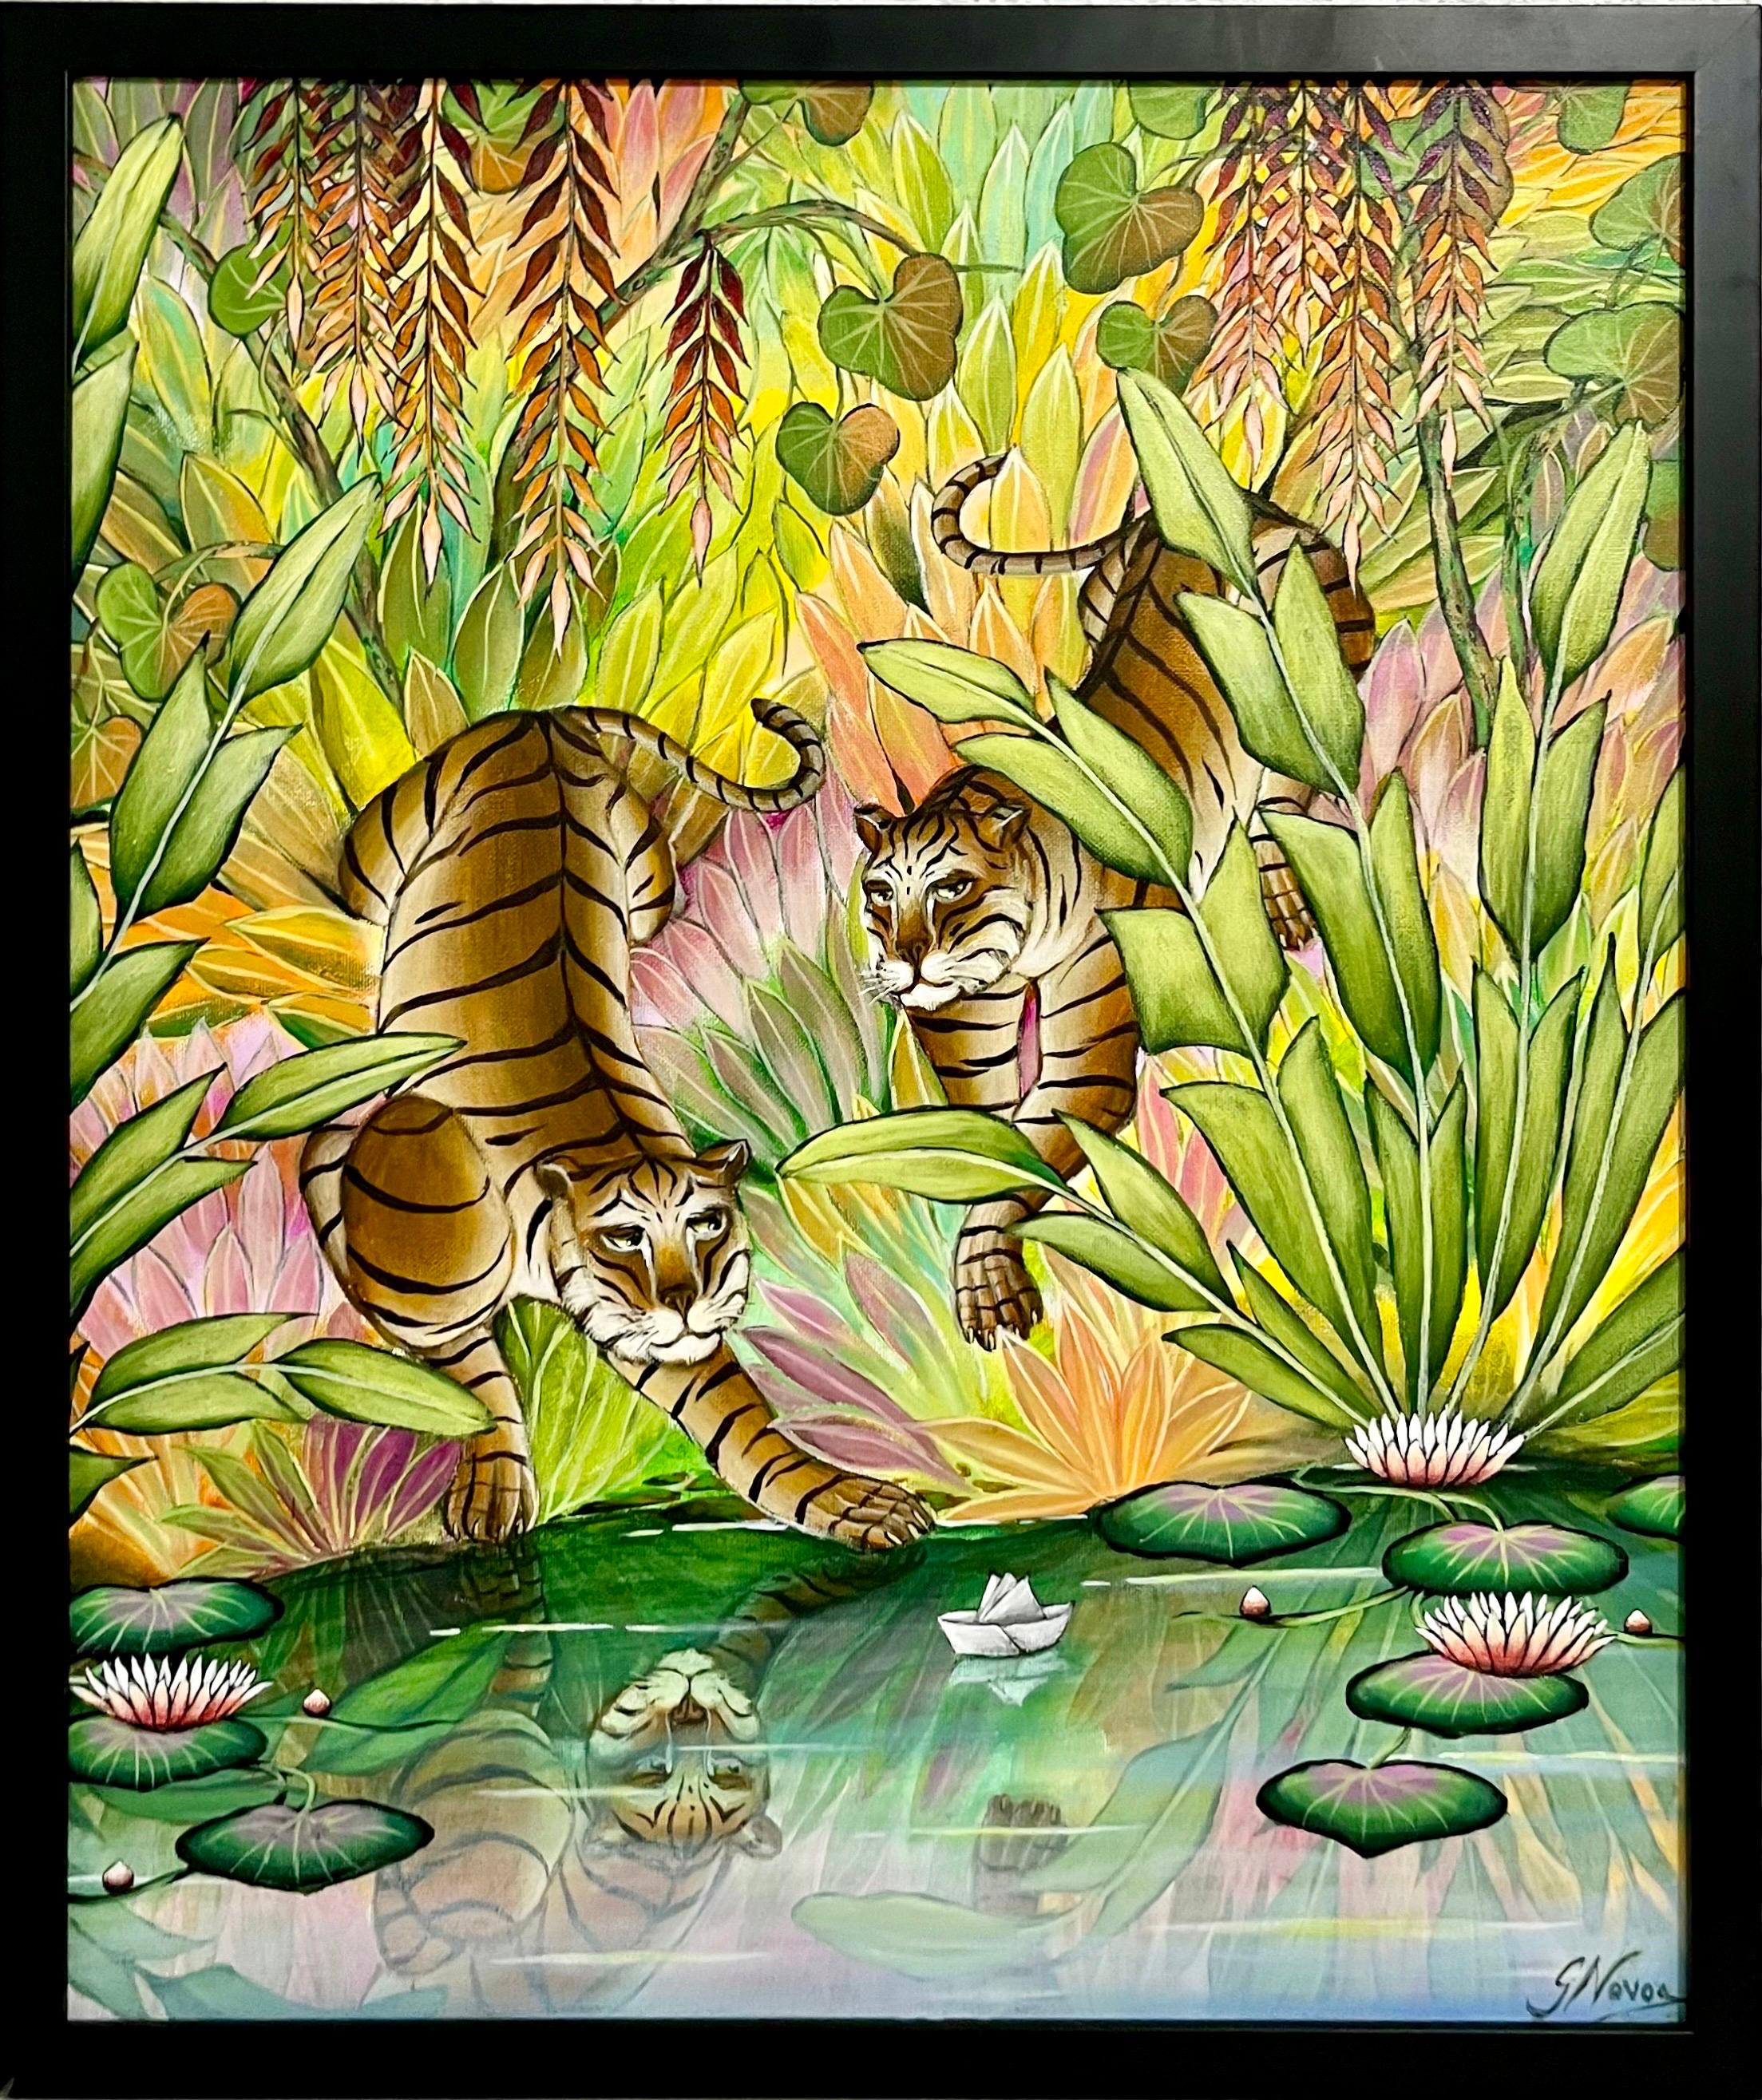 Original Painting tigers in jungle by river with reflection, tropical jungle setting. Titled "Paper Boat".
Hand signed recto and titled verso. 
Framed 25.5  X 21.5  Canvas is 24 X 20

Gustavo Novoa, Born 1941 in Santiago, Chile, He attended the